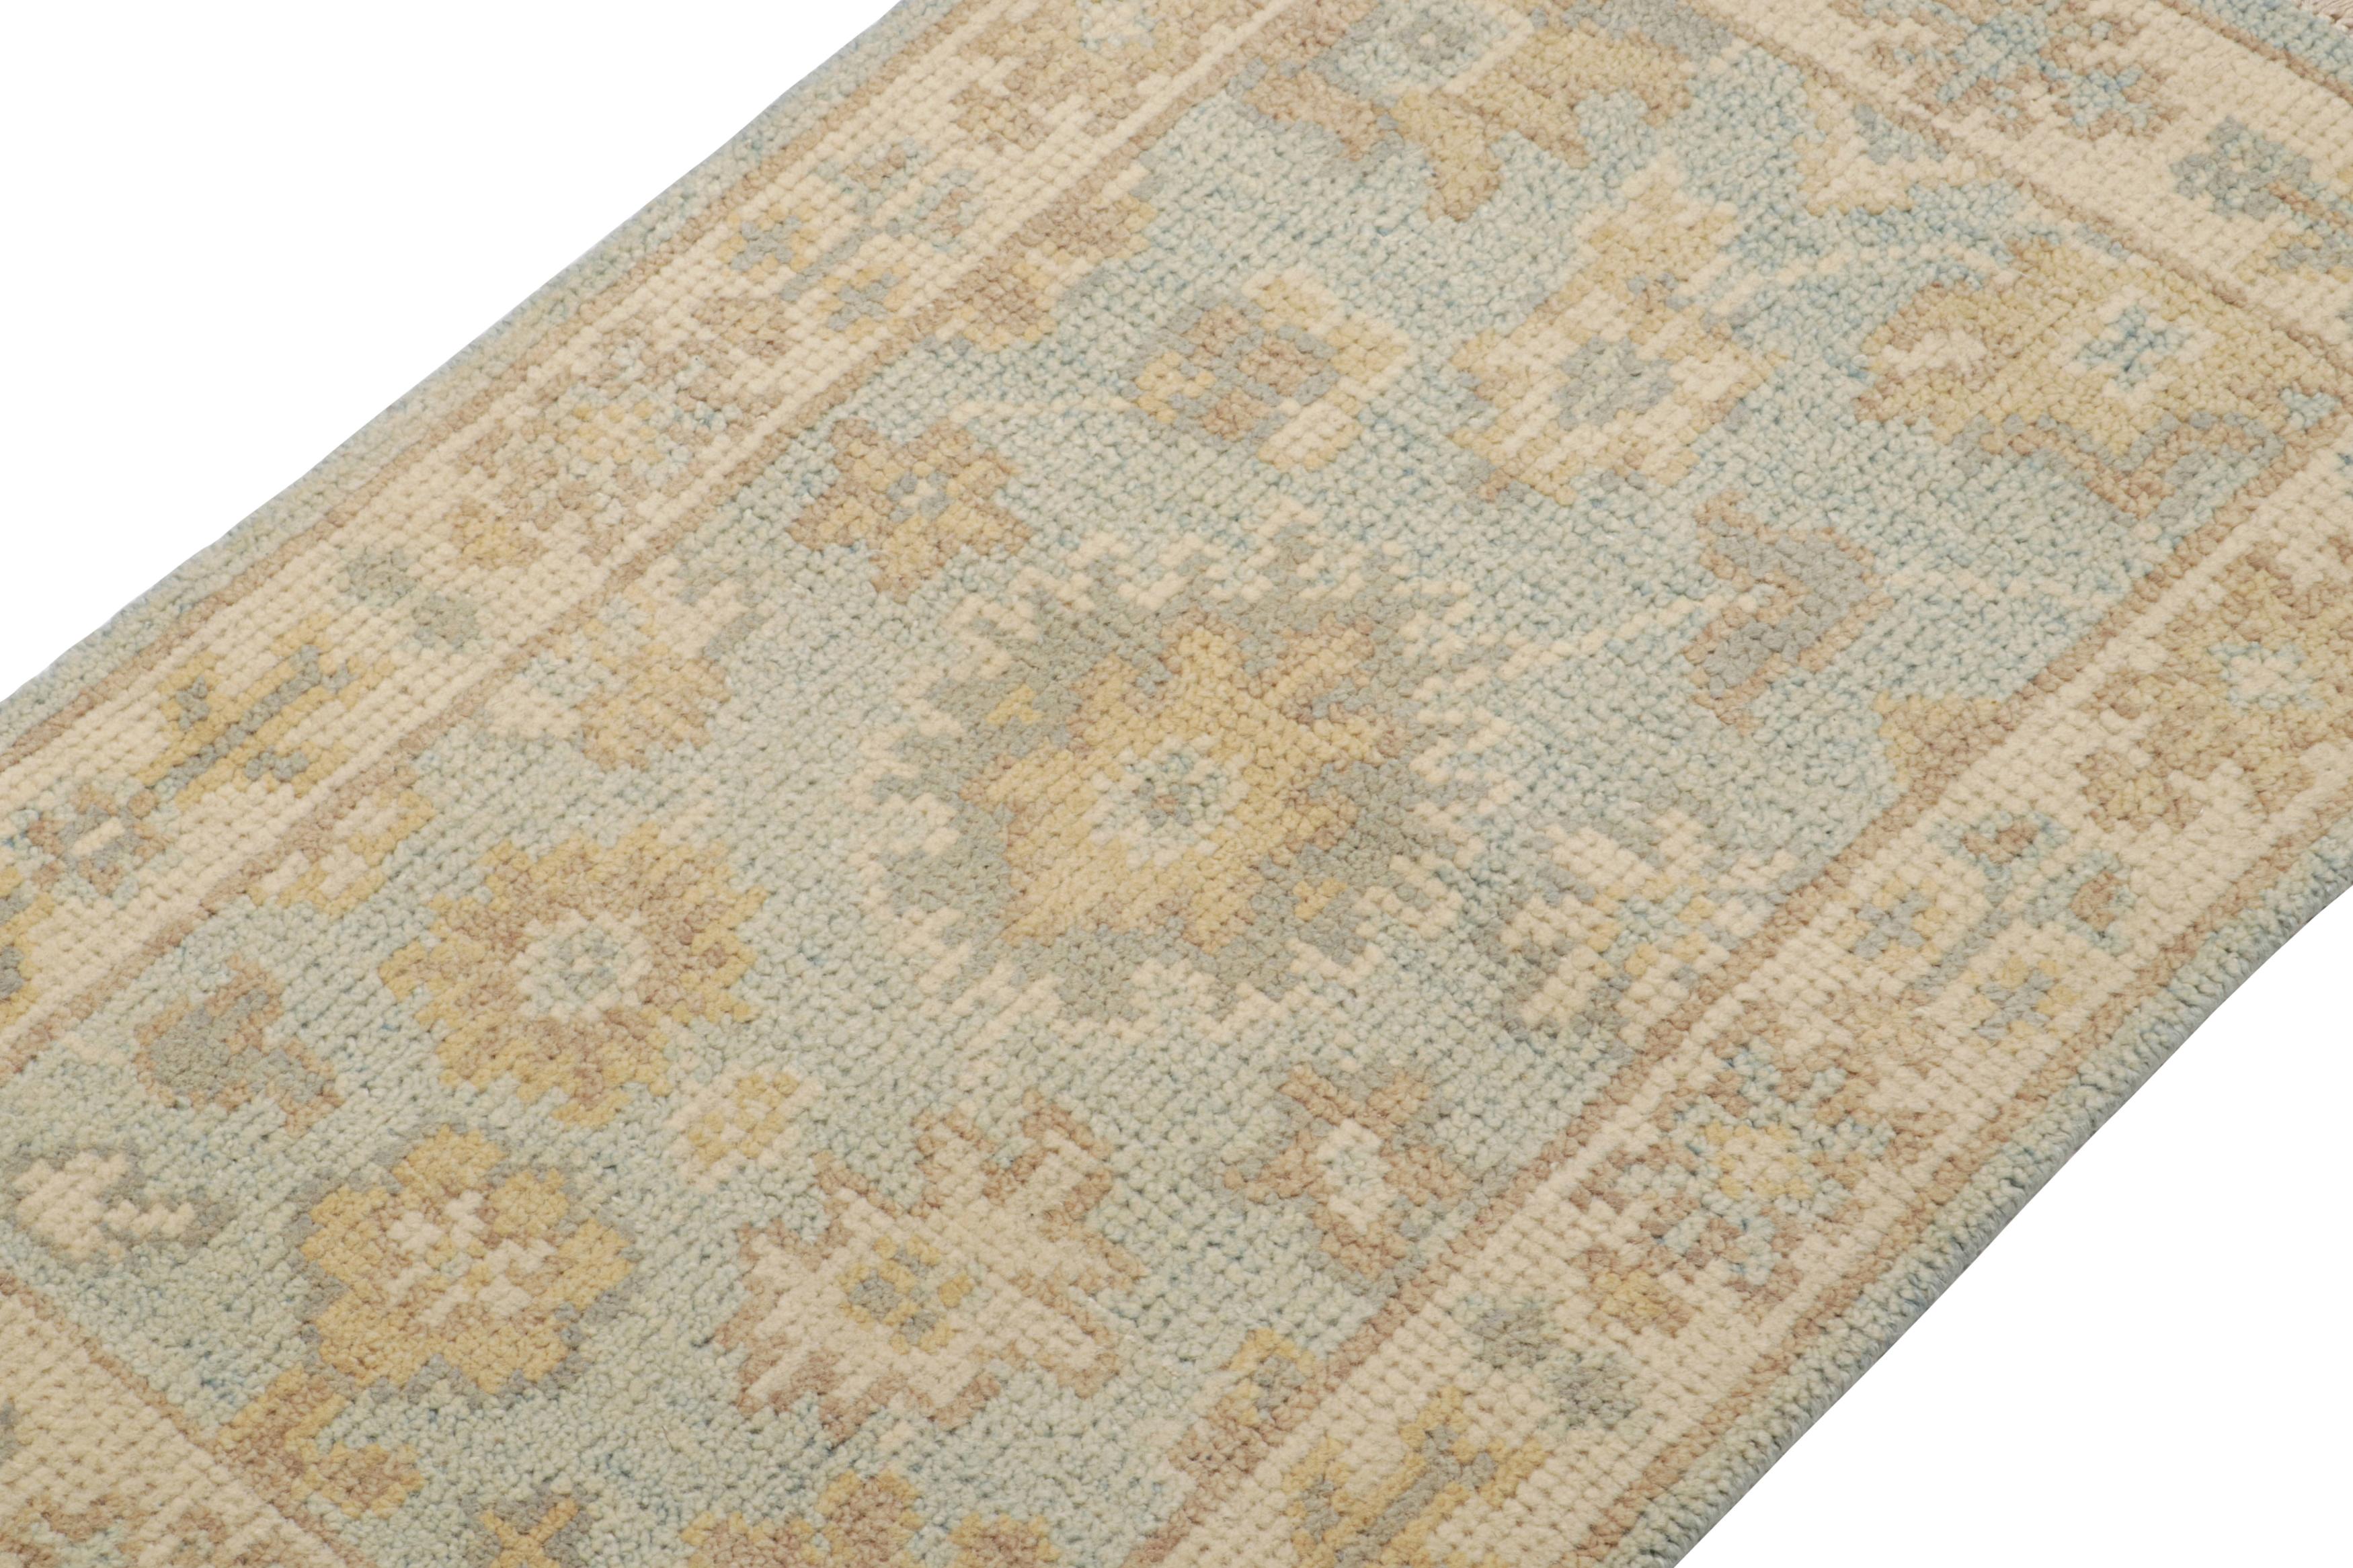 Indian Rug & Kilim’s Oushak Style Rug in Blue with Beige-Brown Floral Patterns For Sale